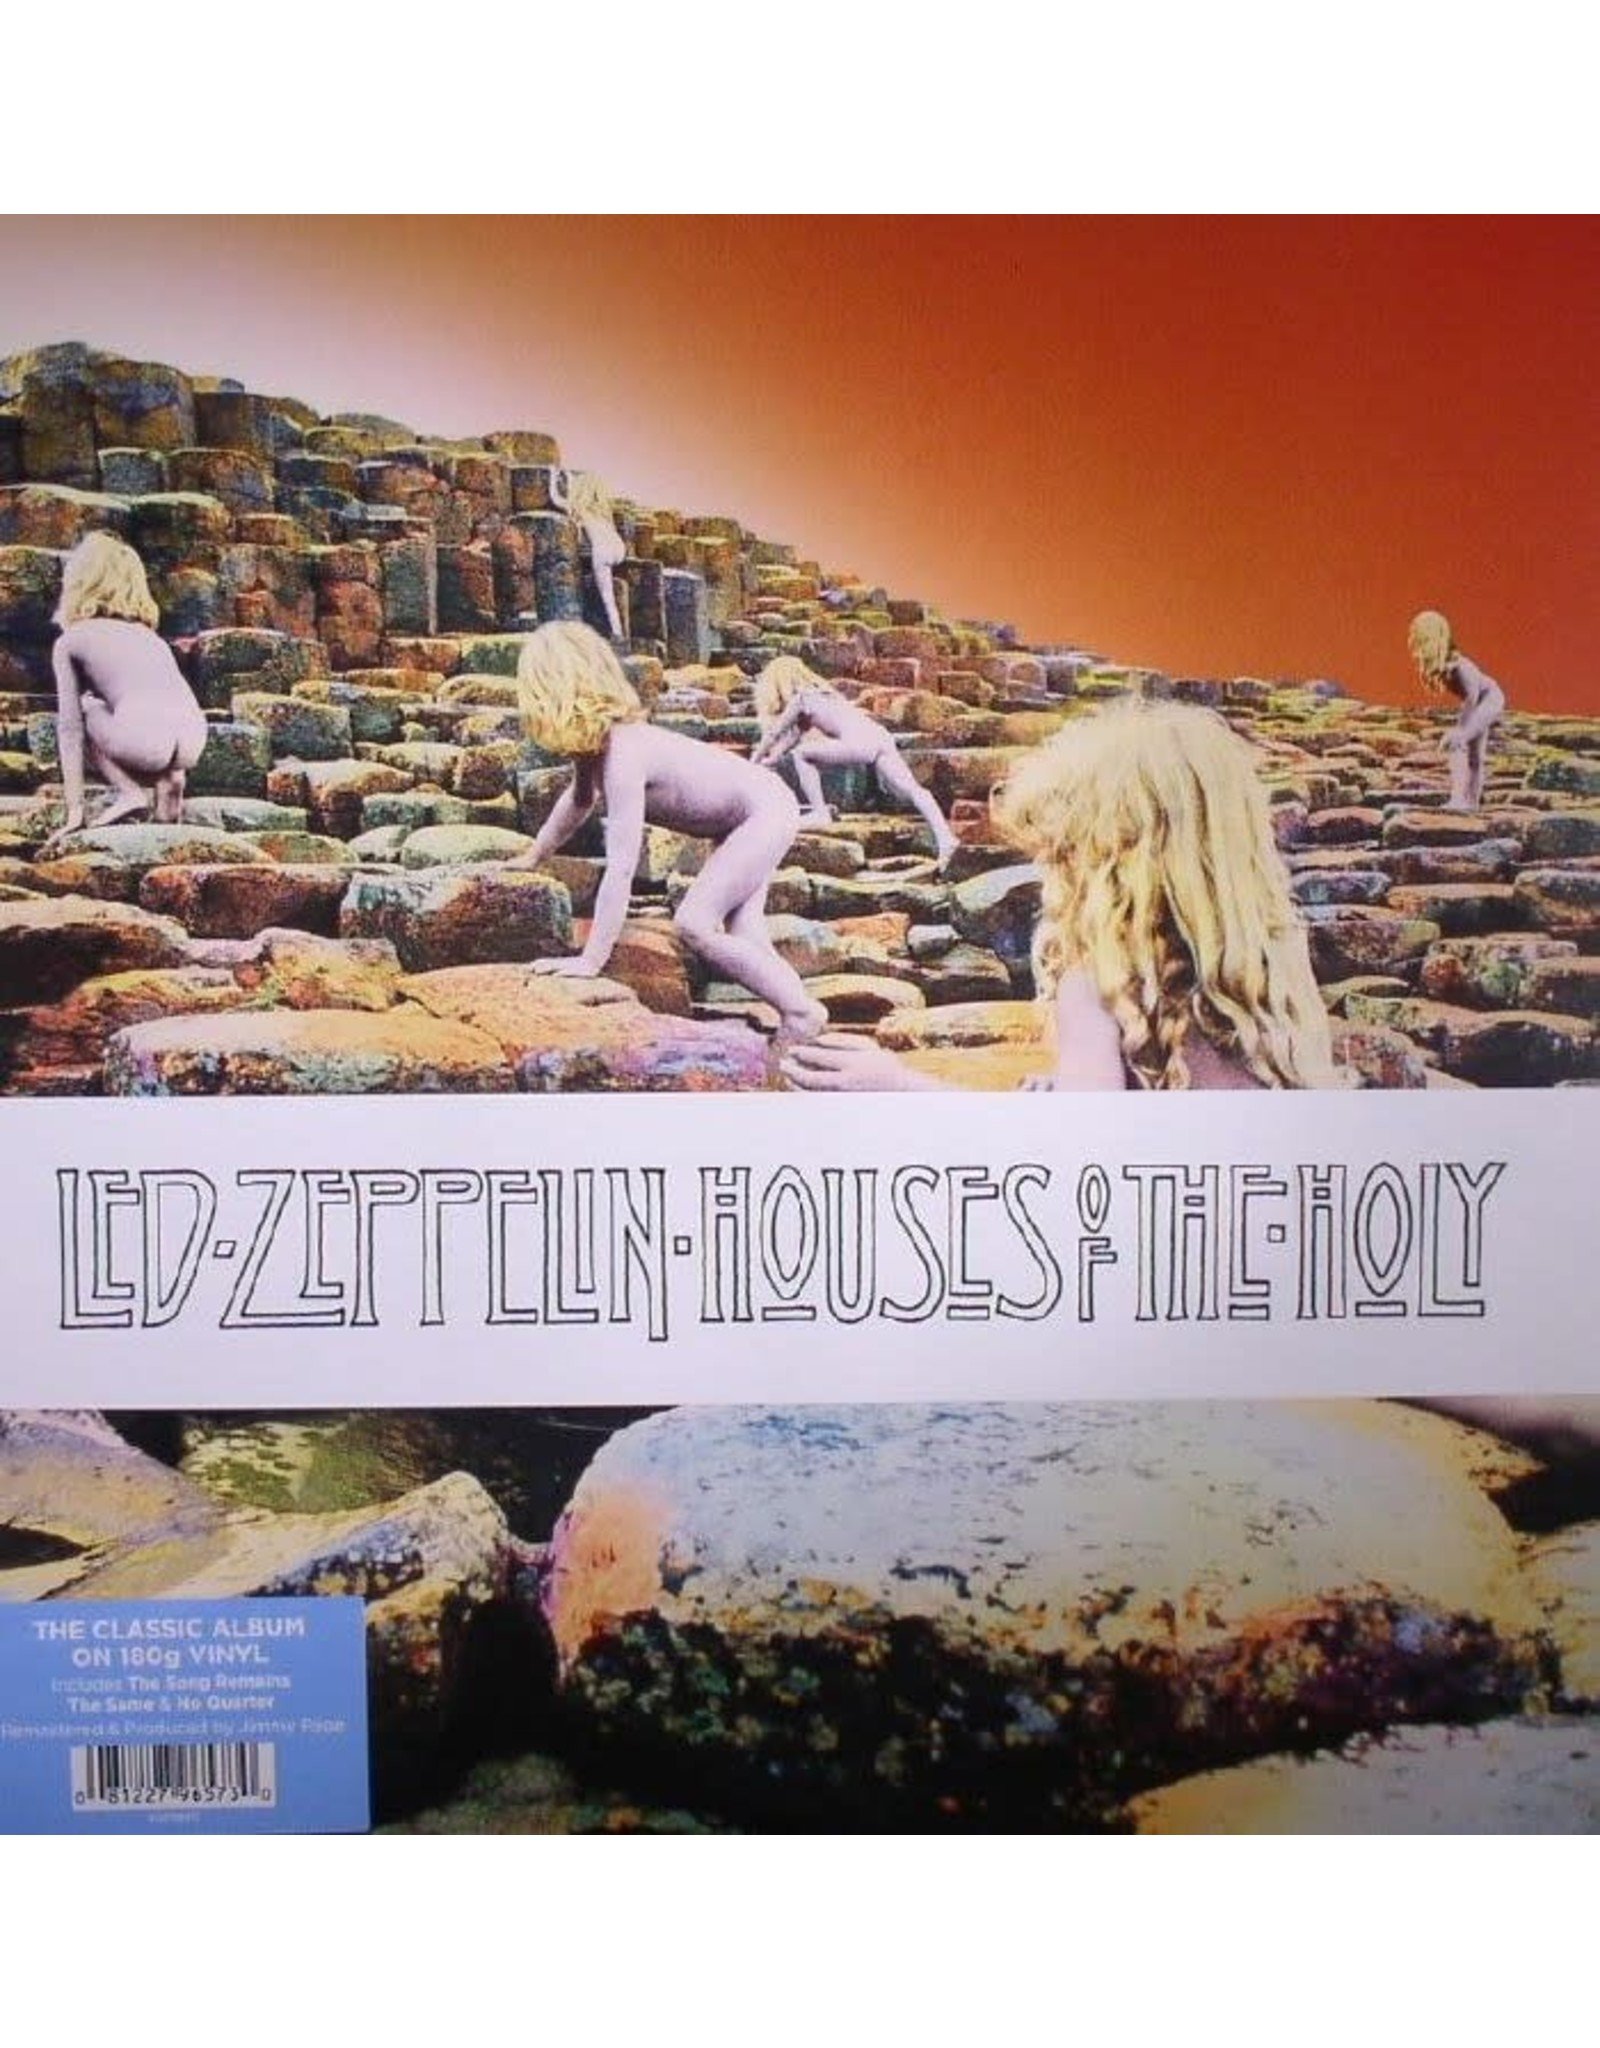 Led Zeppelin - Houses of the Holy 2LP